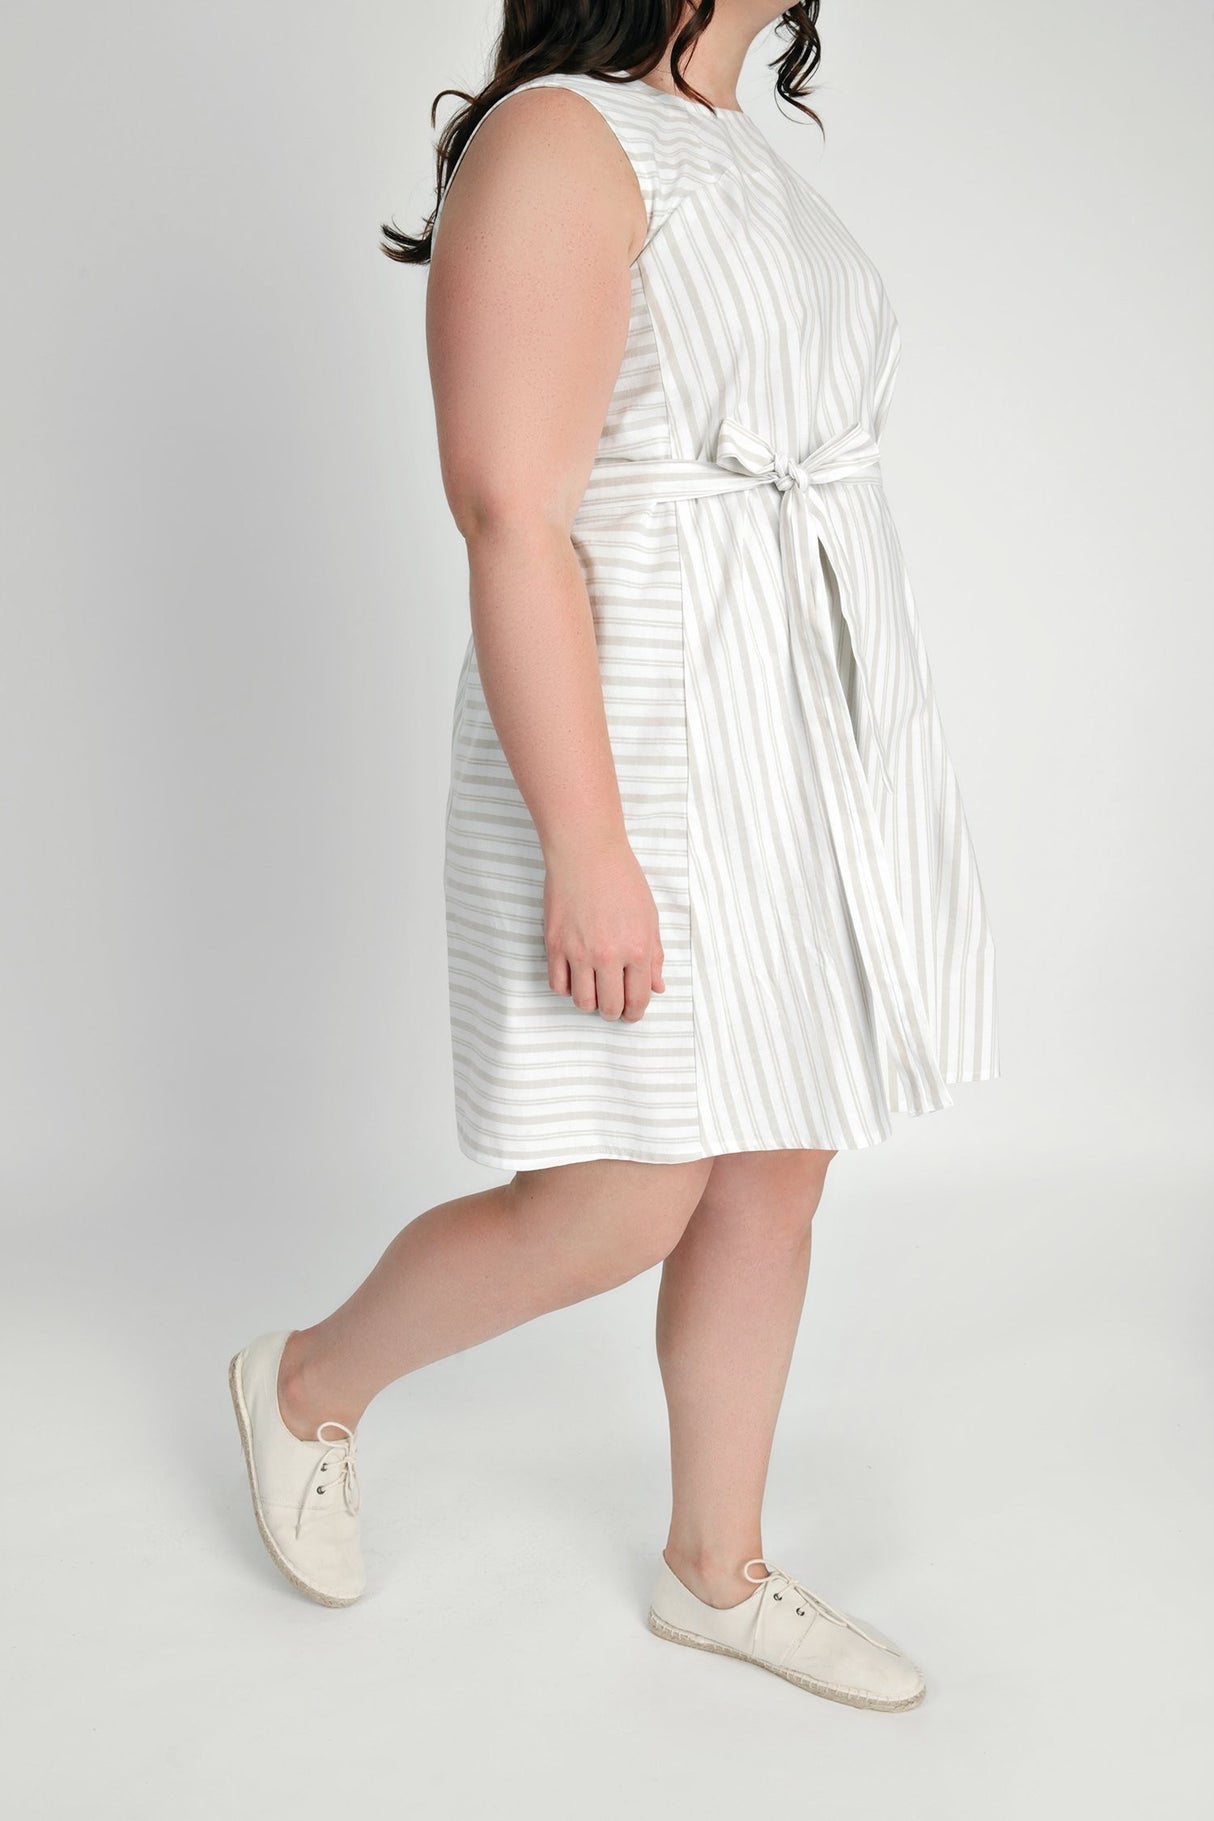 The Rushcutter Dress Printed Pattern